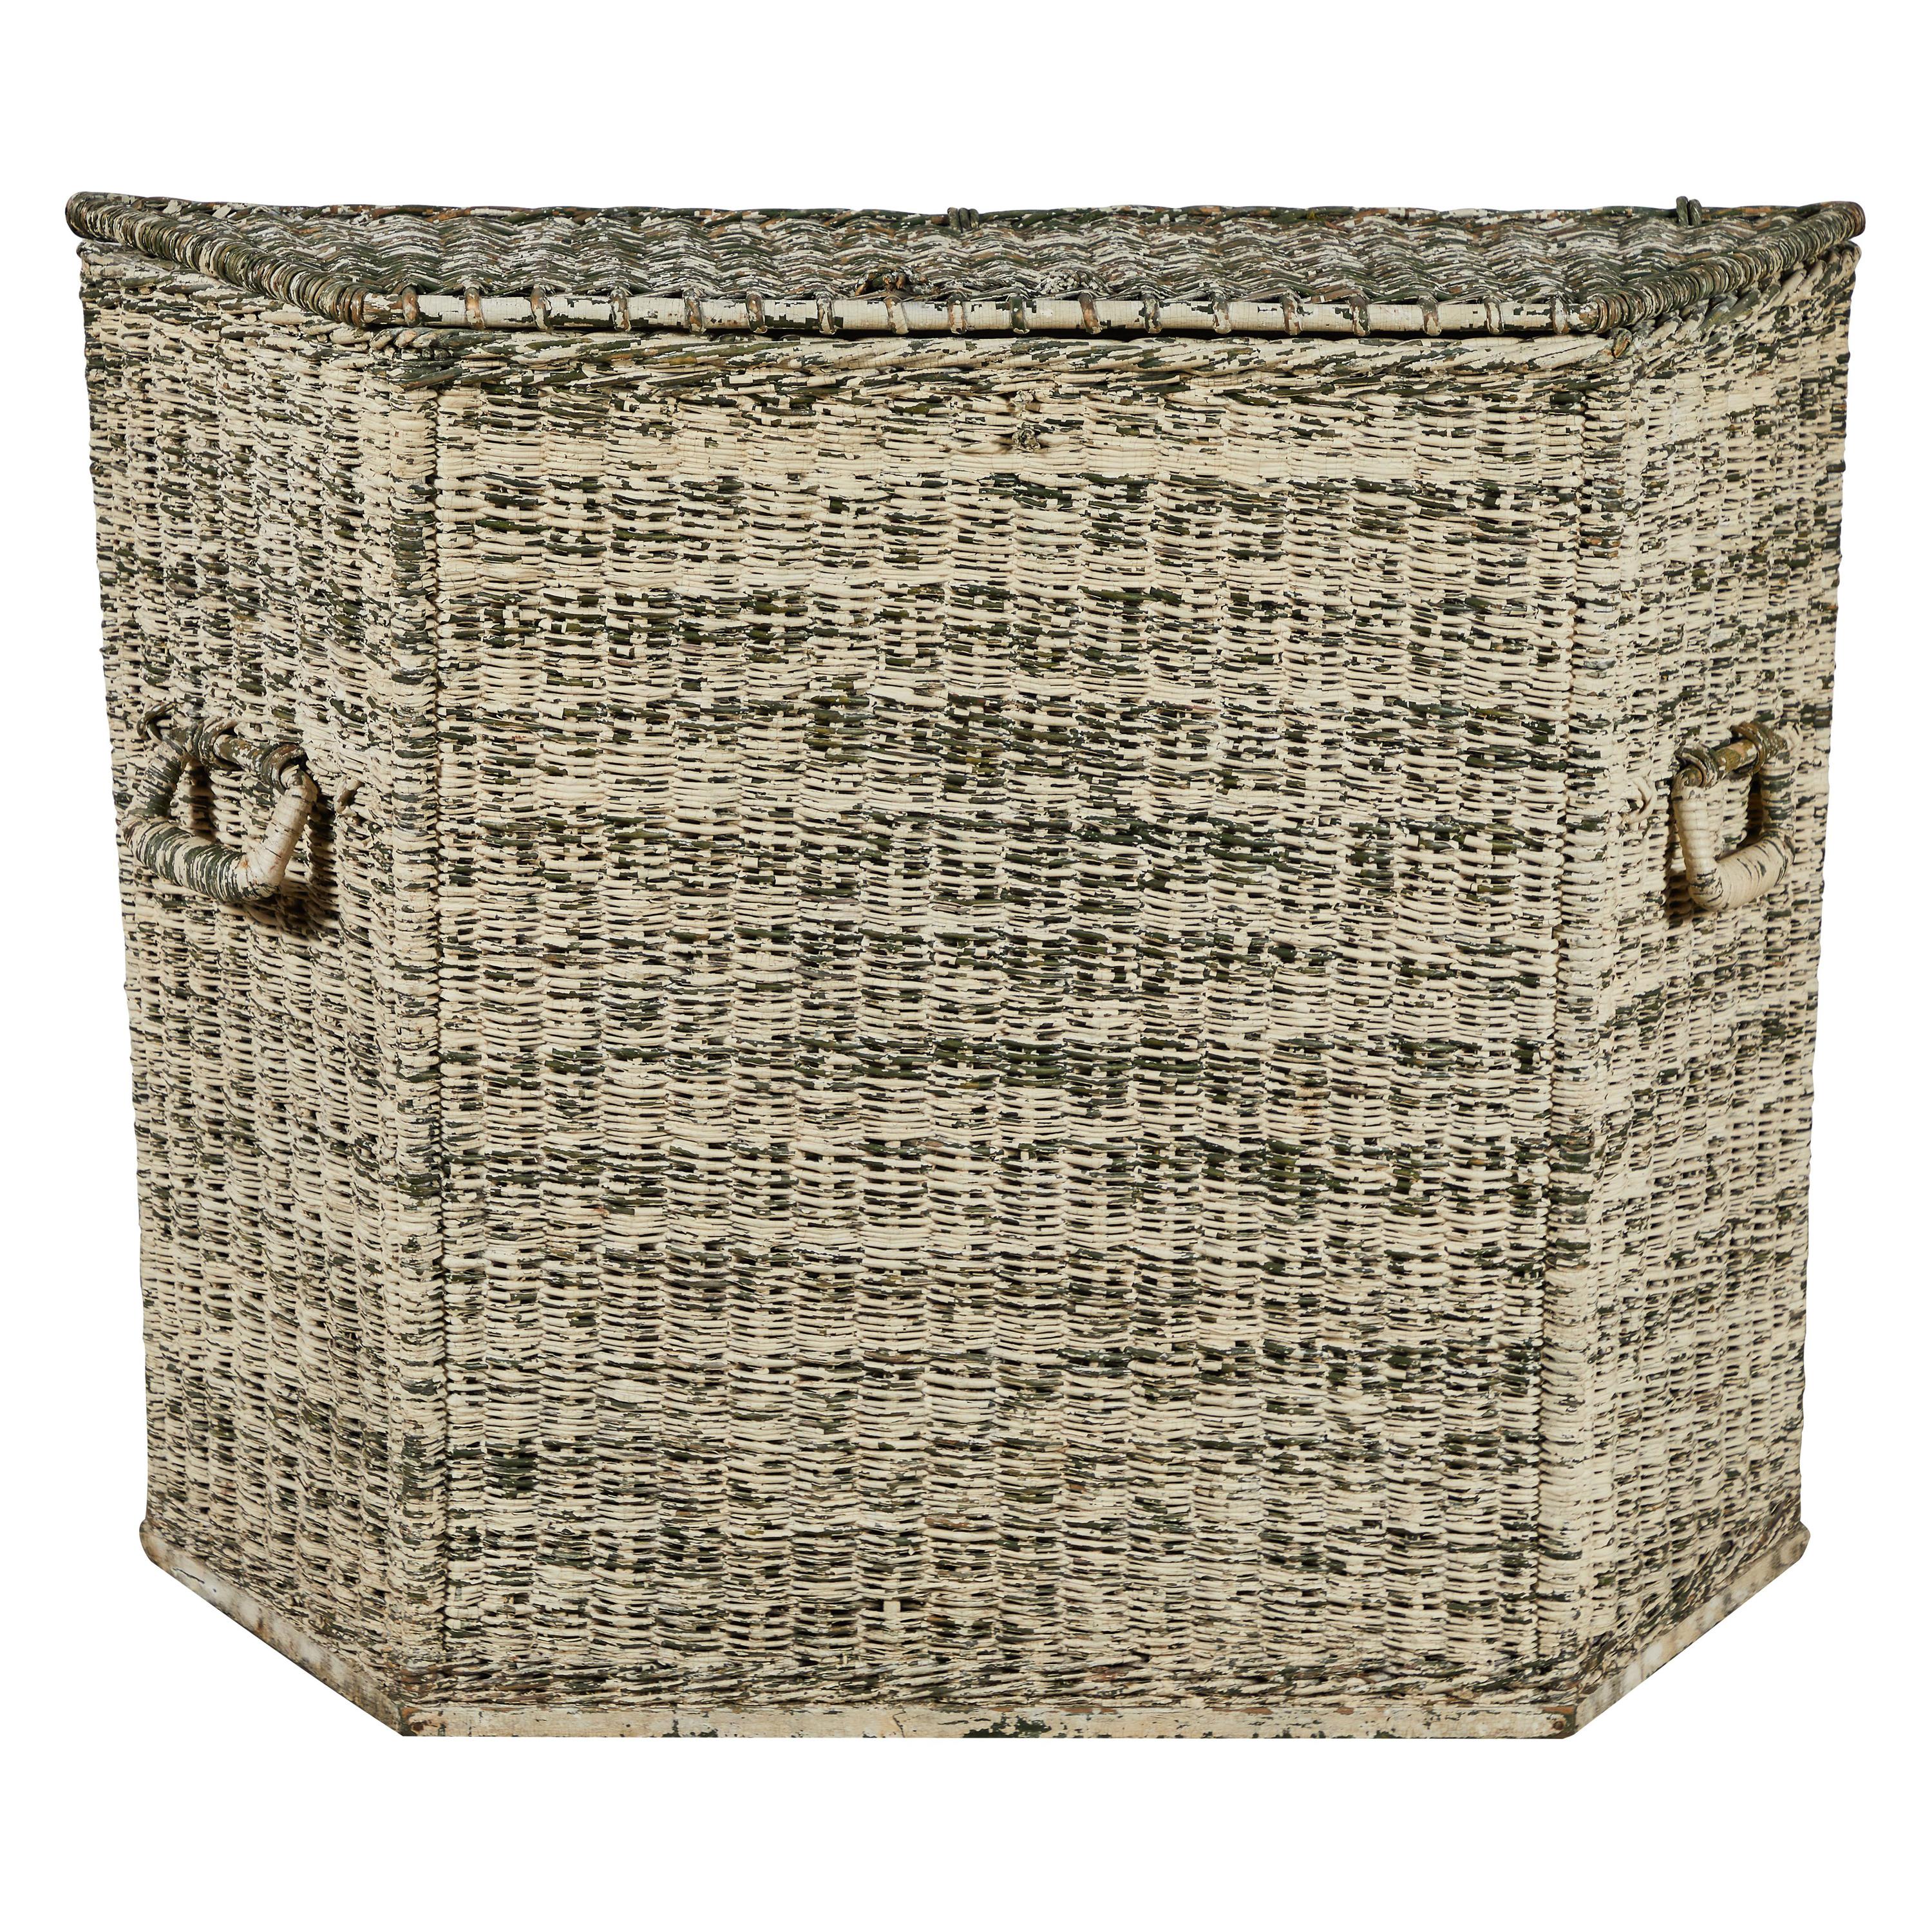 Early American White Washed Wicker Wide Basket with Lid